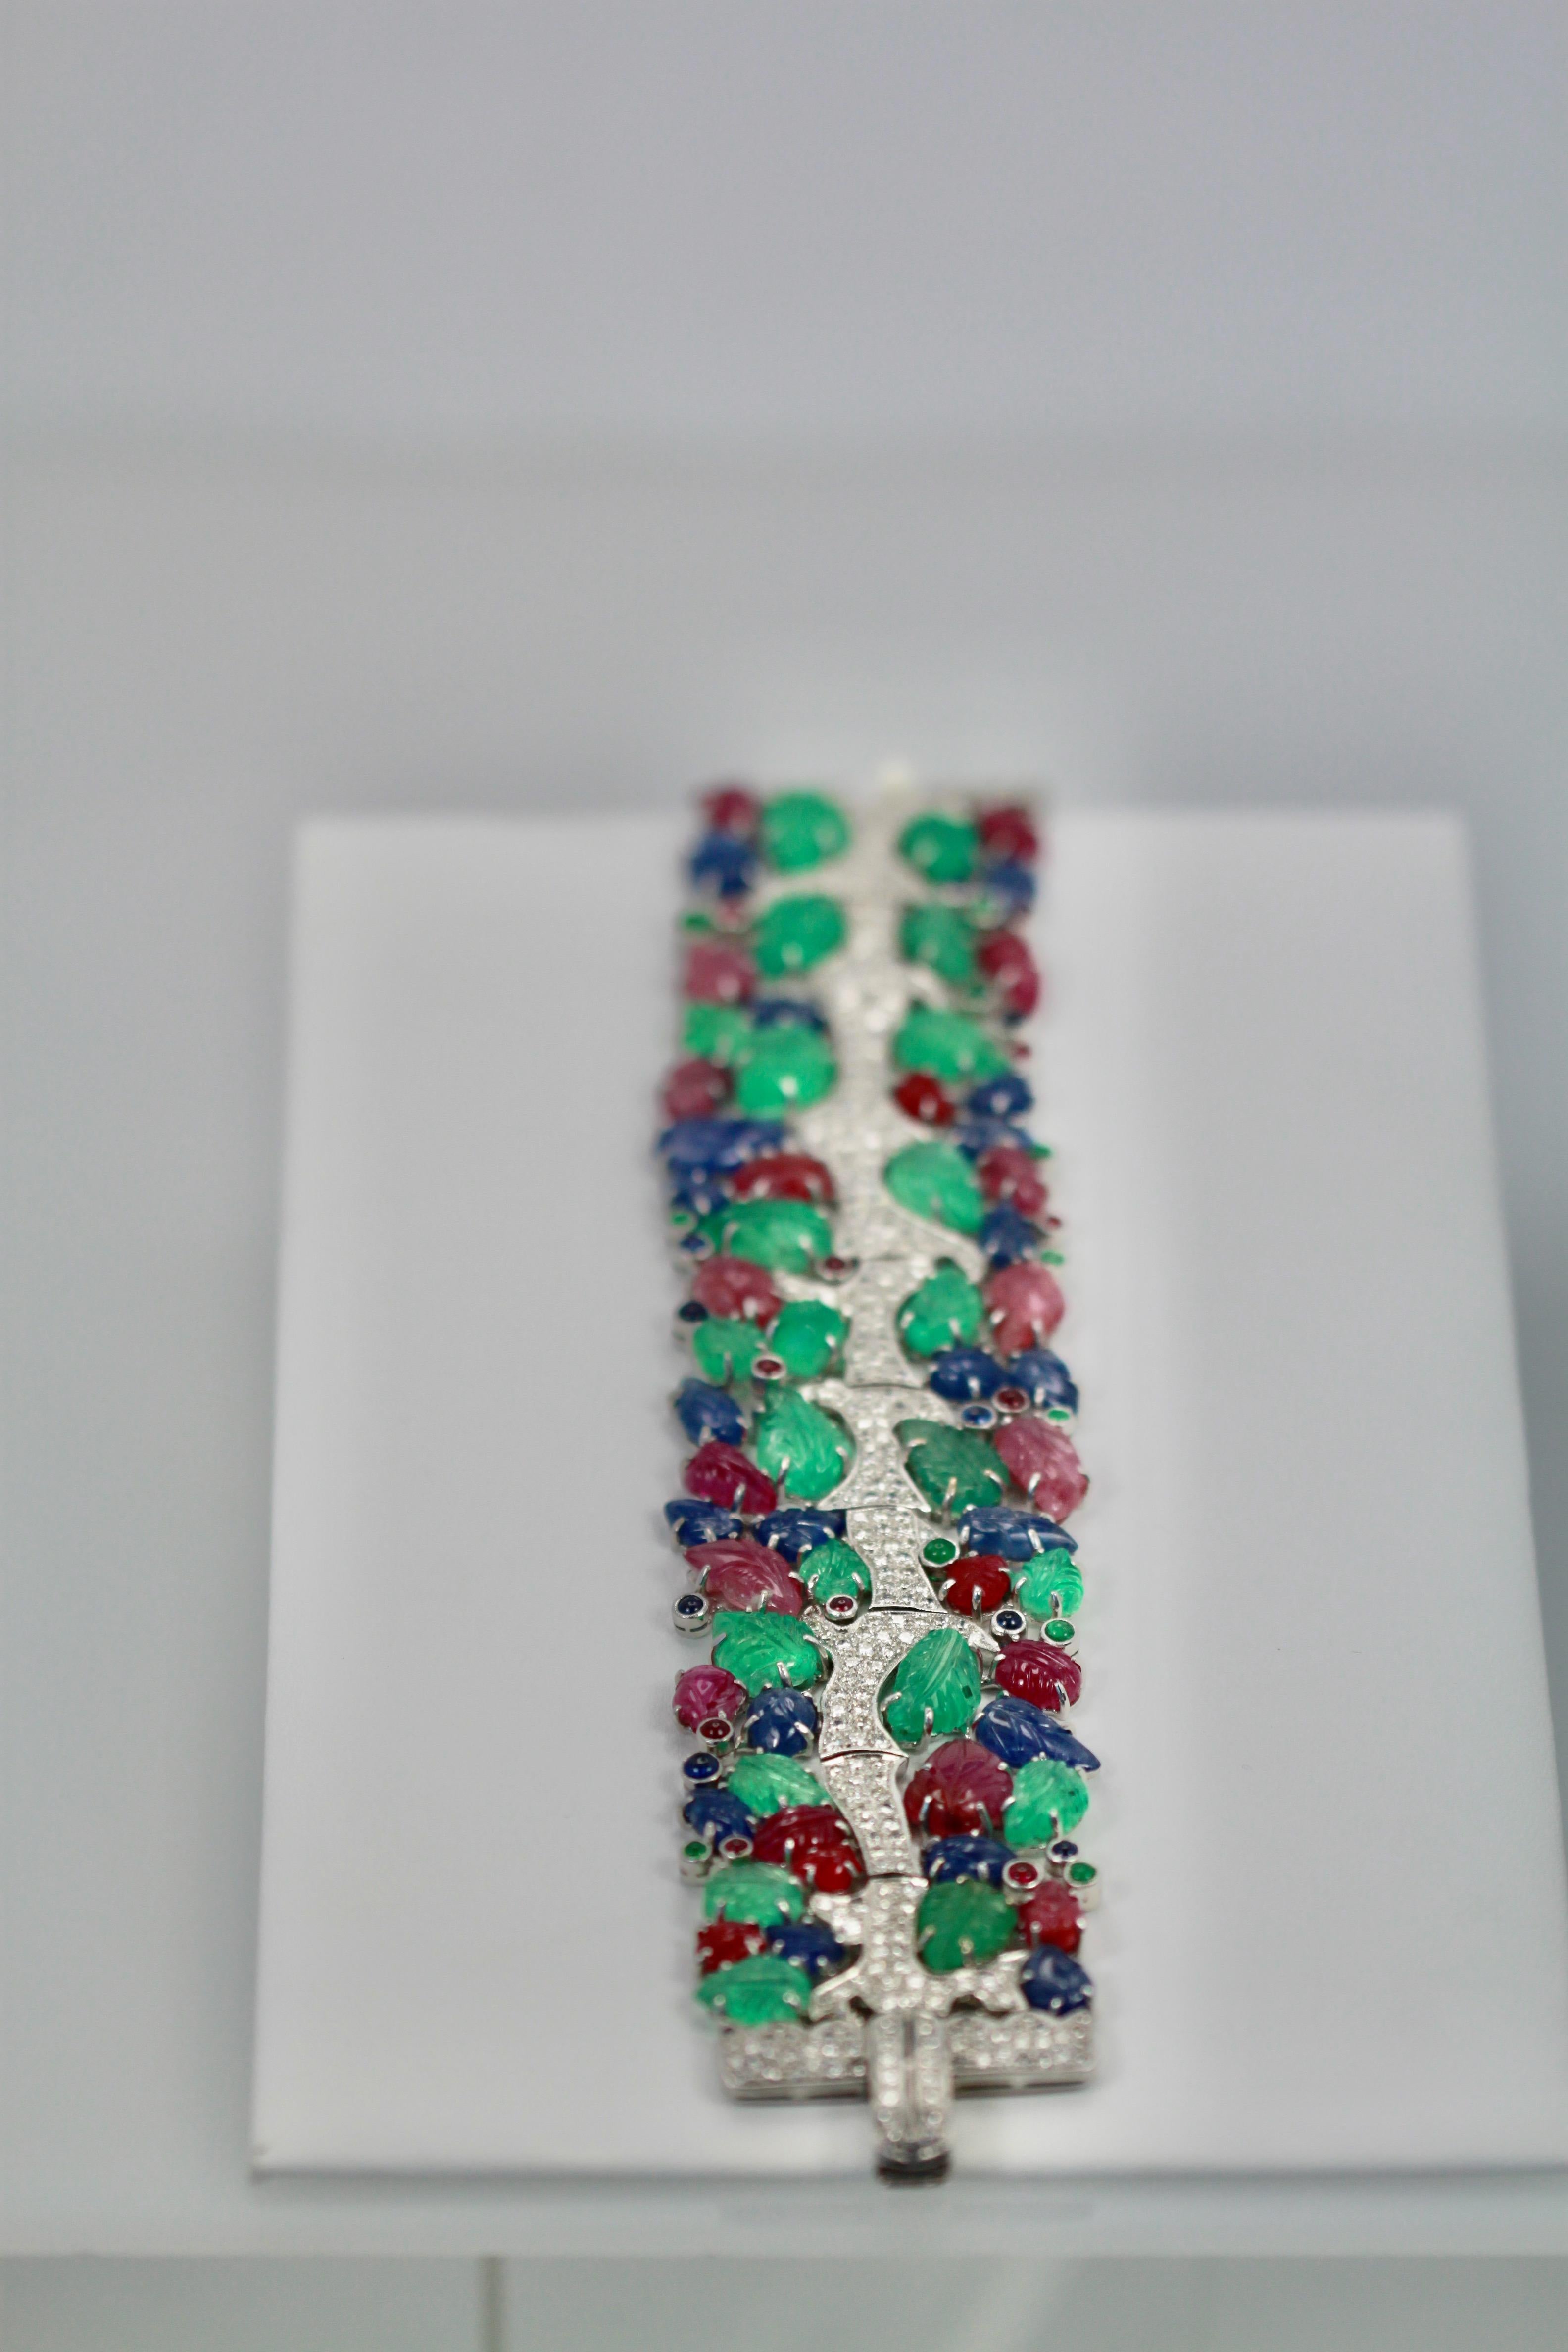 Tutti Frutti Carved Stones Diamond Bracelet 18 Karat Wide In Excellent Condition For Sale In North Hollywood, CA